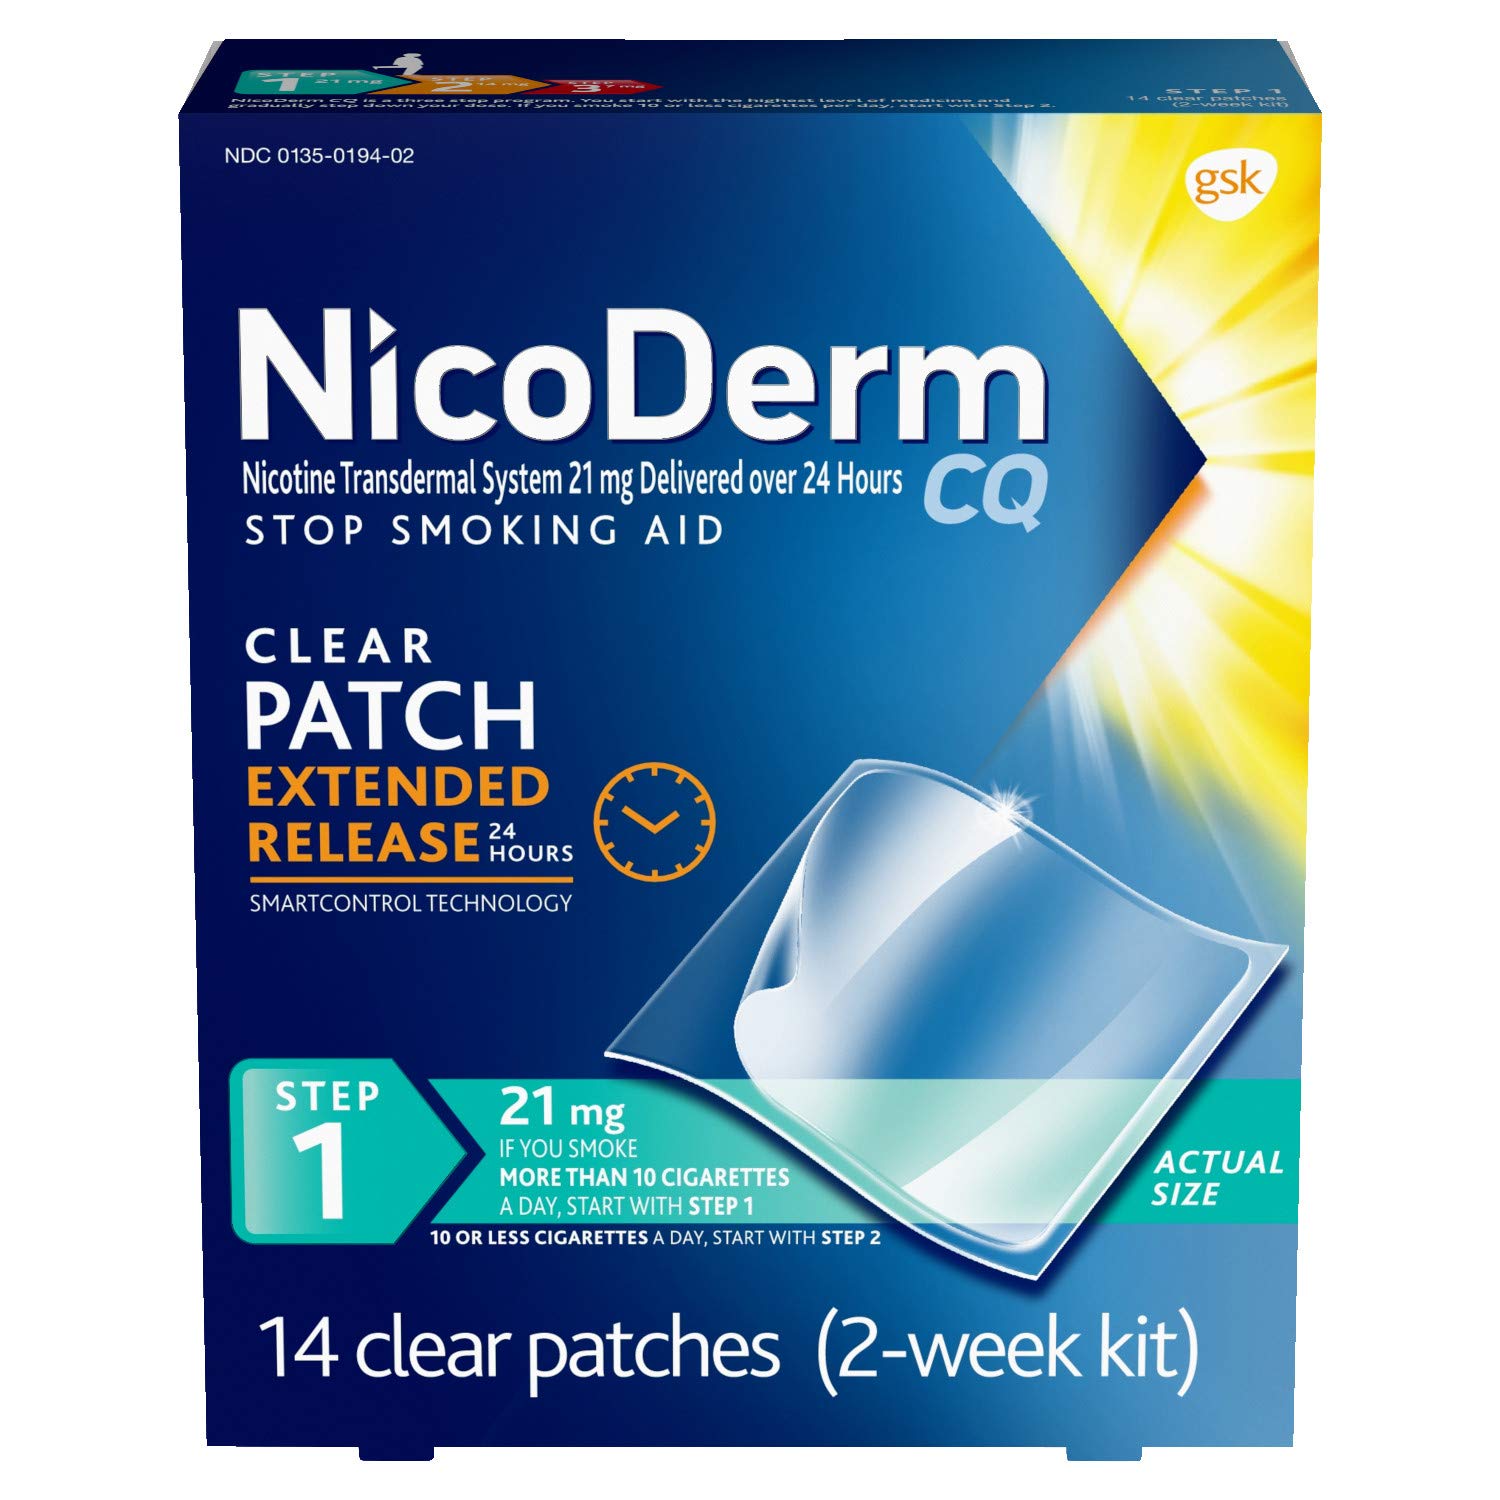 NicoDerm CQ Clear Patches, 21 mg, Step 1-14 ct, Pack of 2